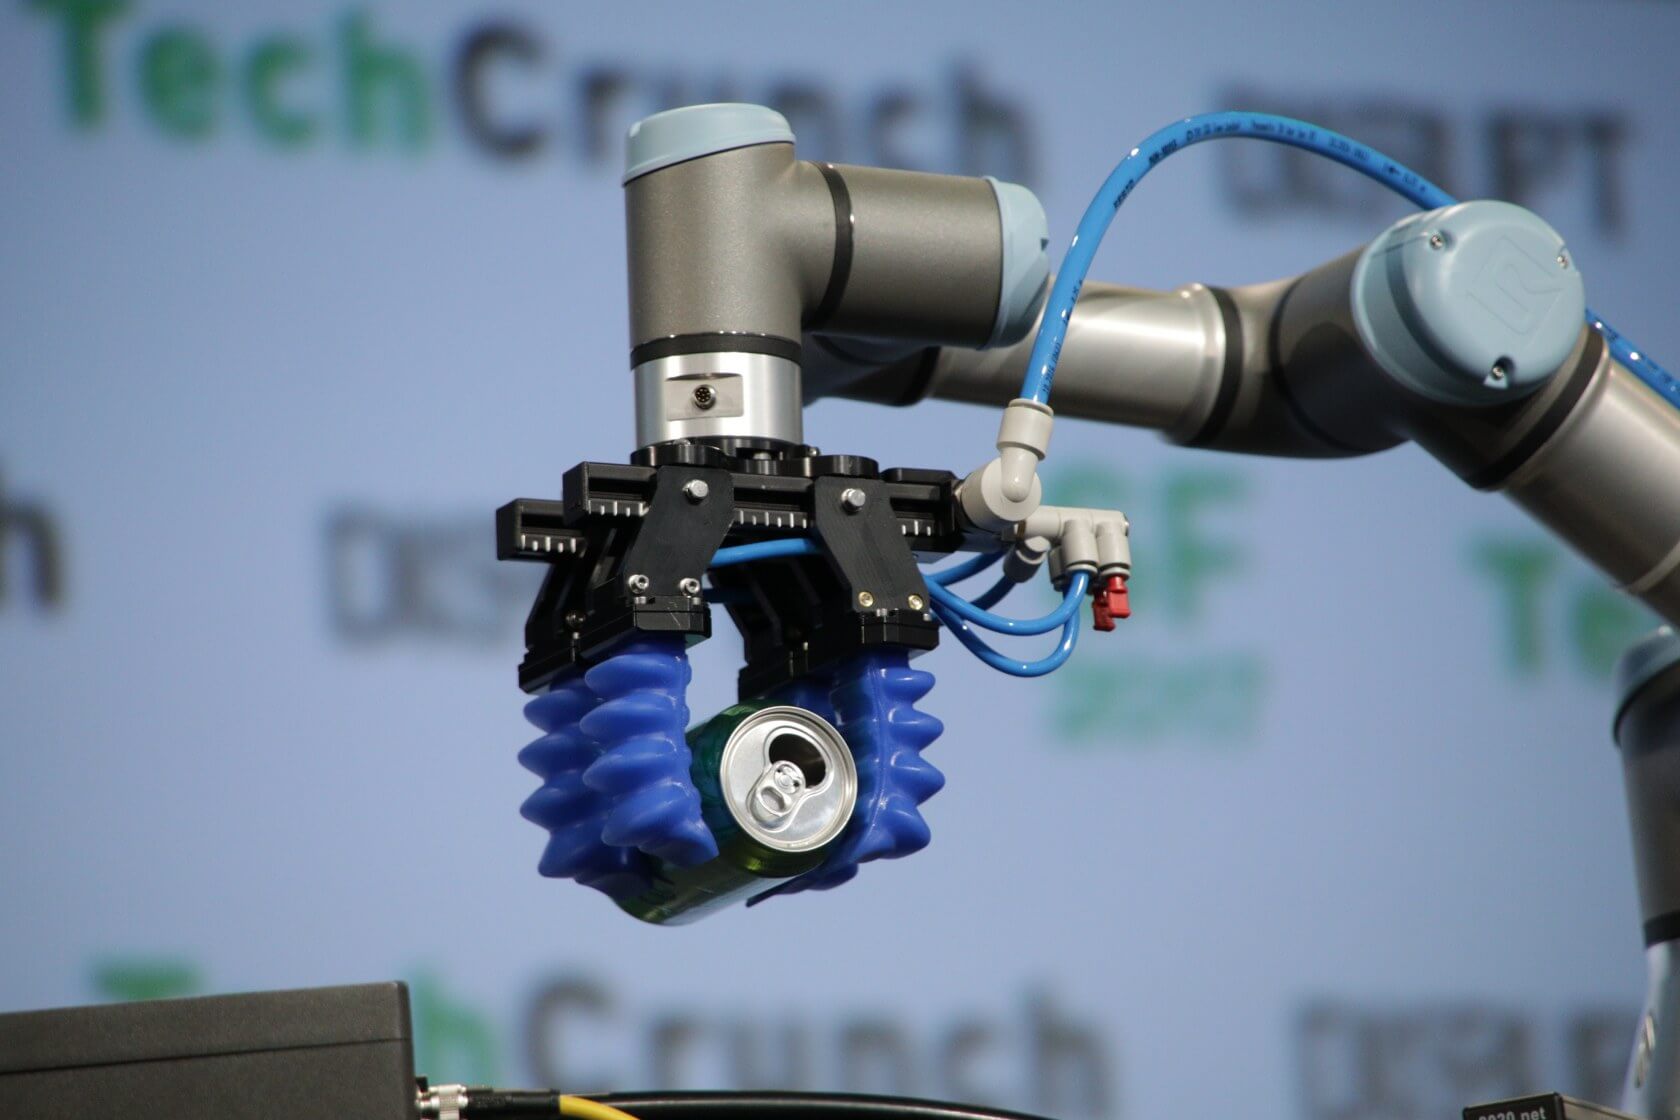 Researchers create a robotic hand that can 'sweat'